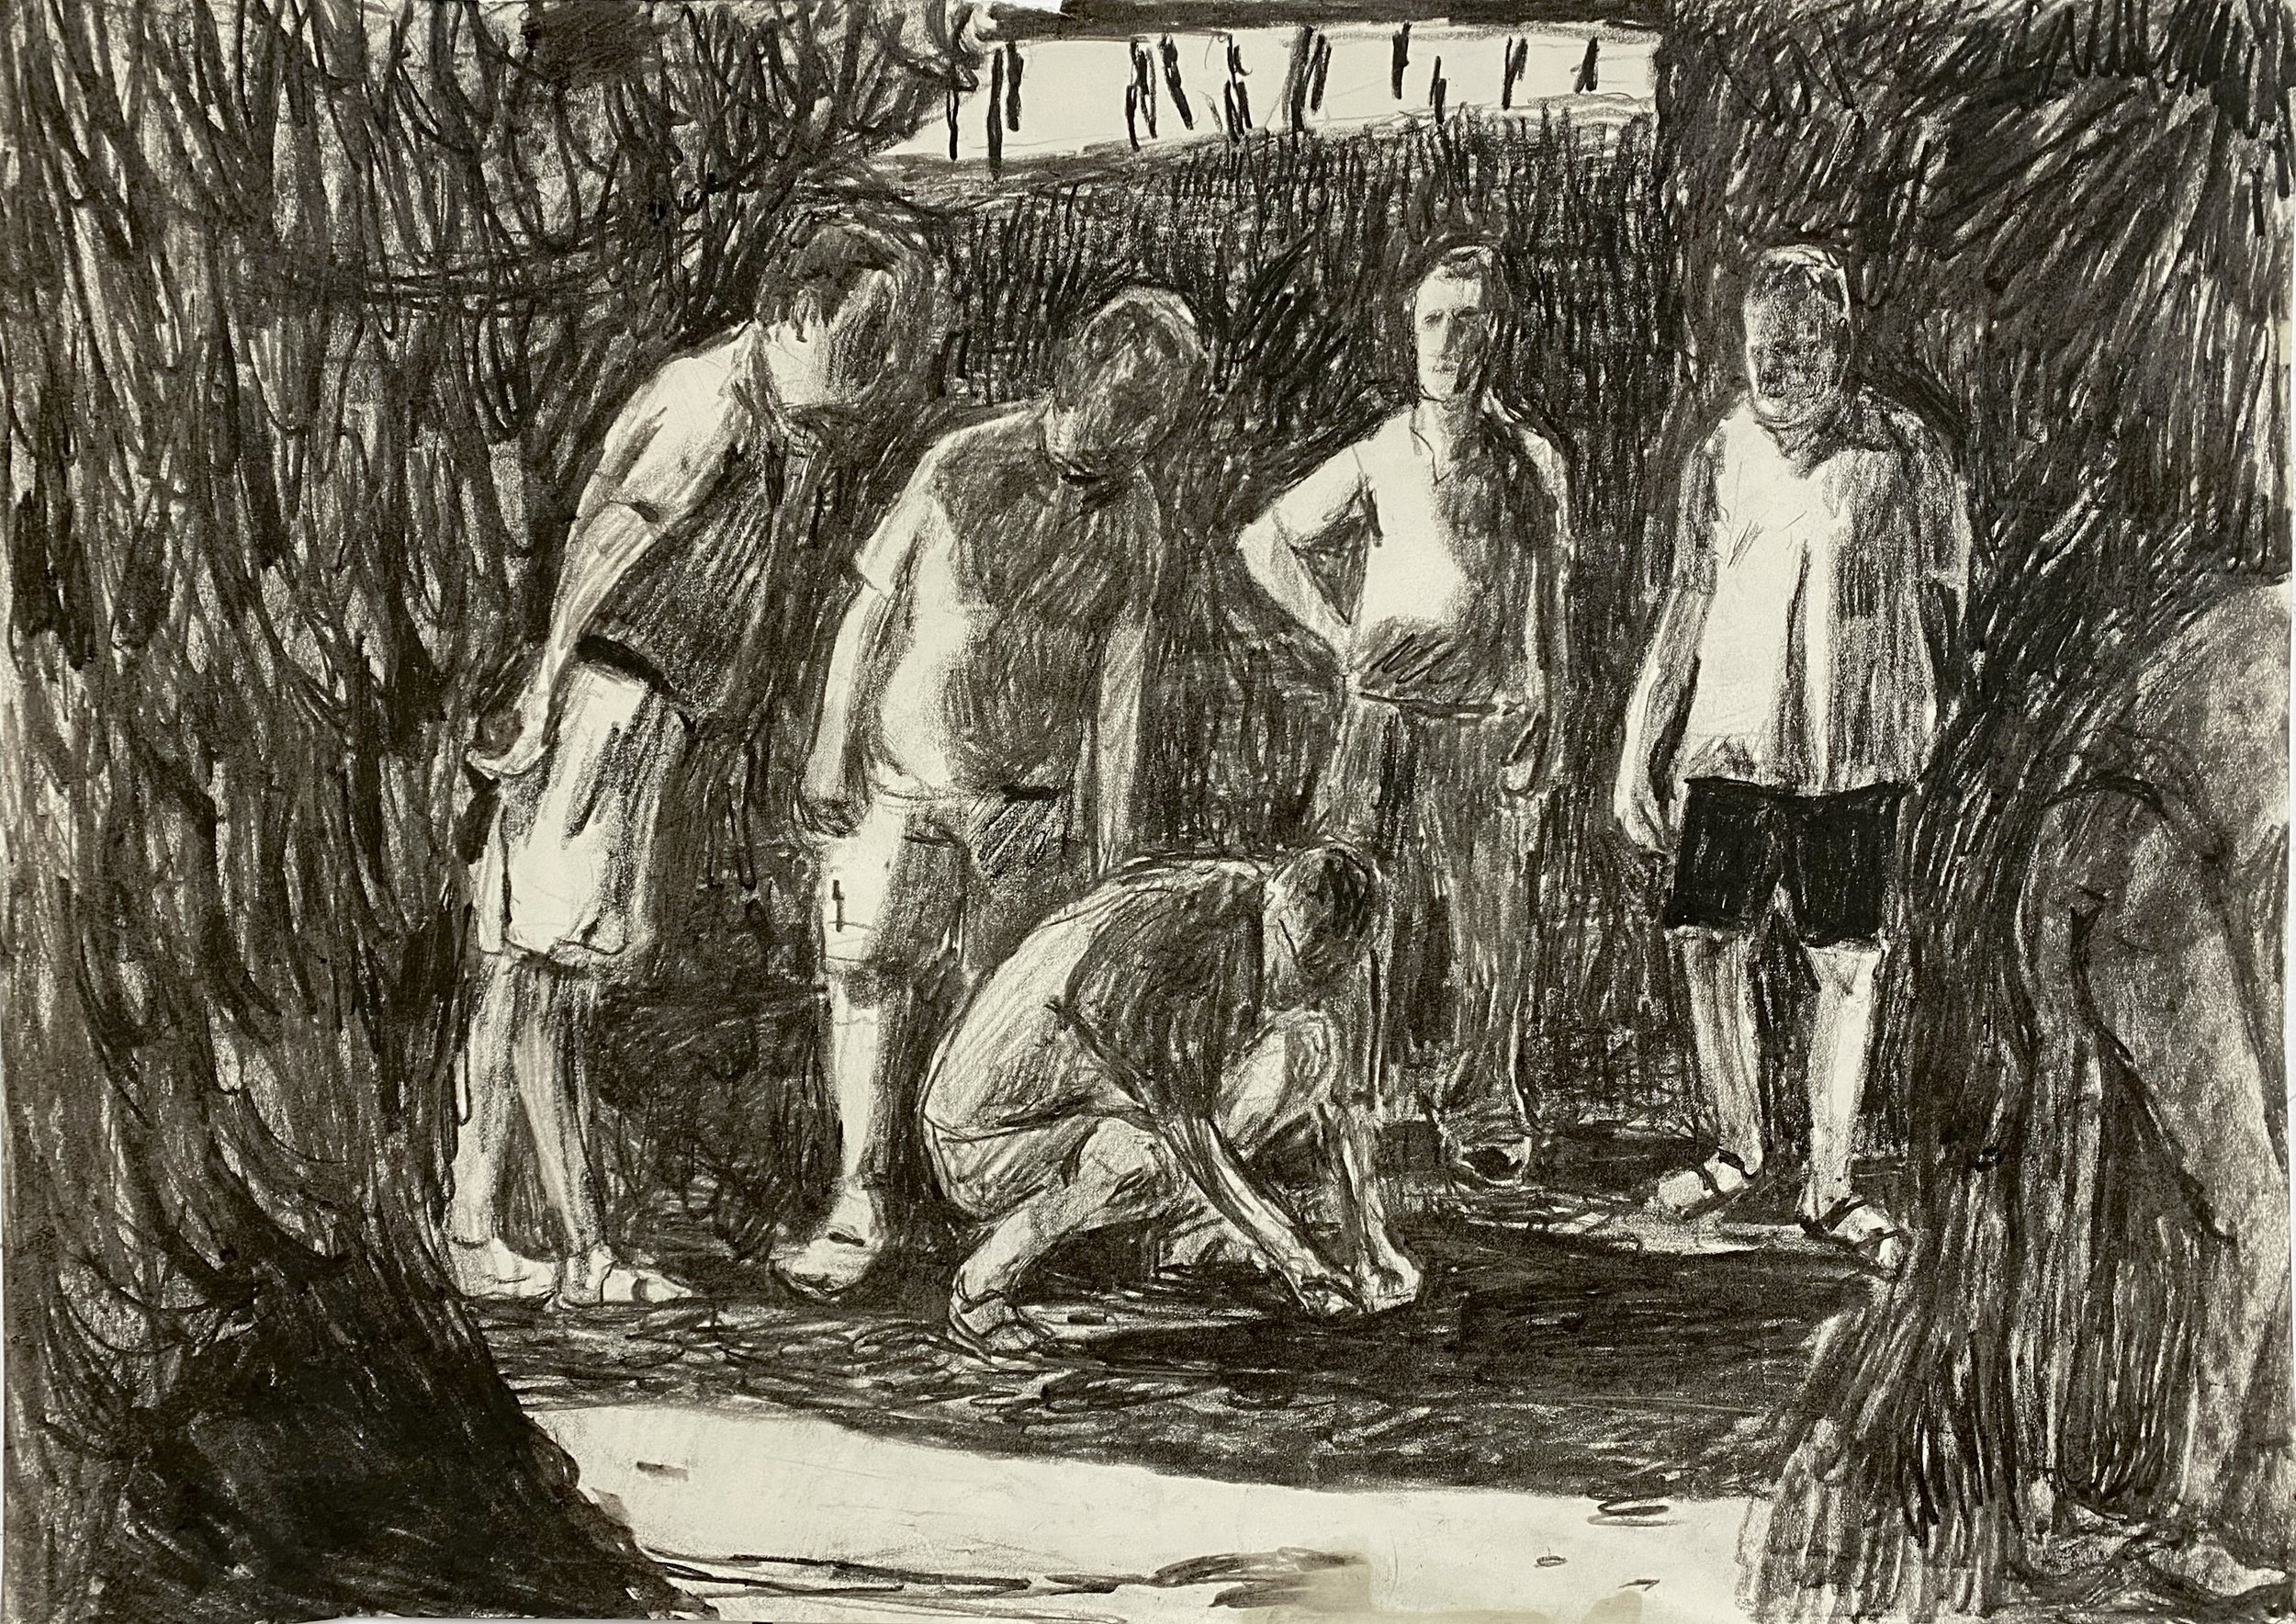   Bowlers , charcoal on paper, (60 x 42cm) 2023 